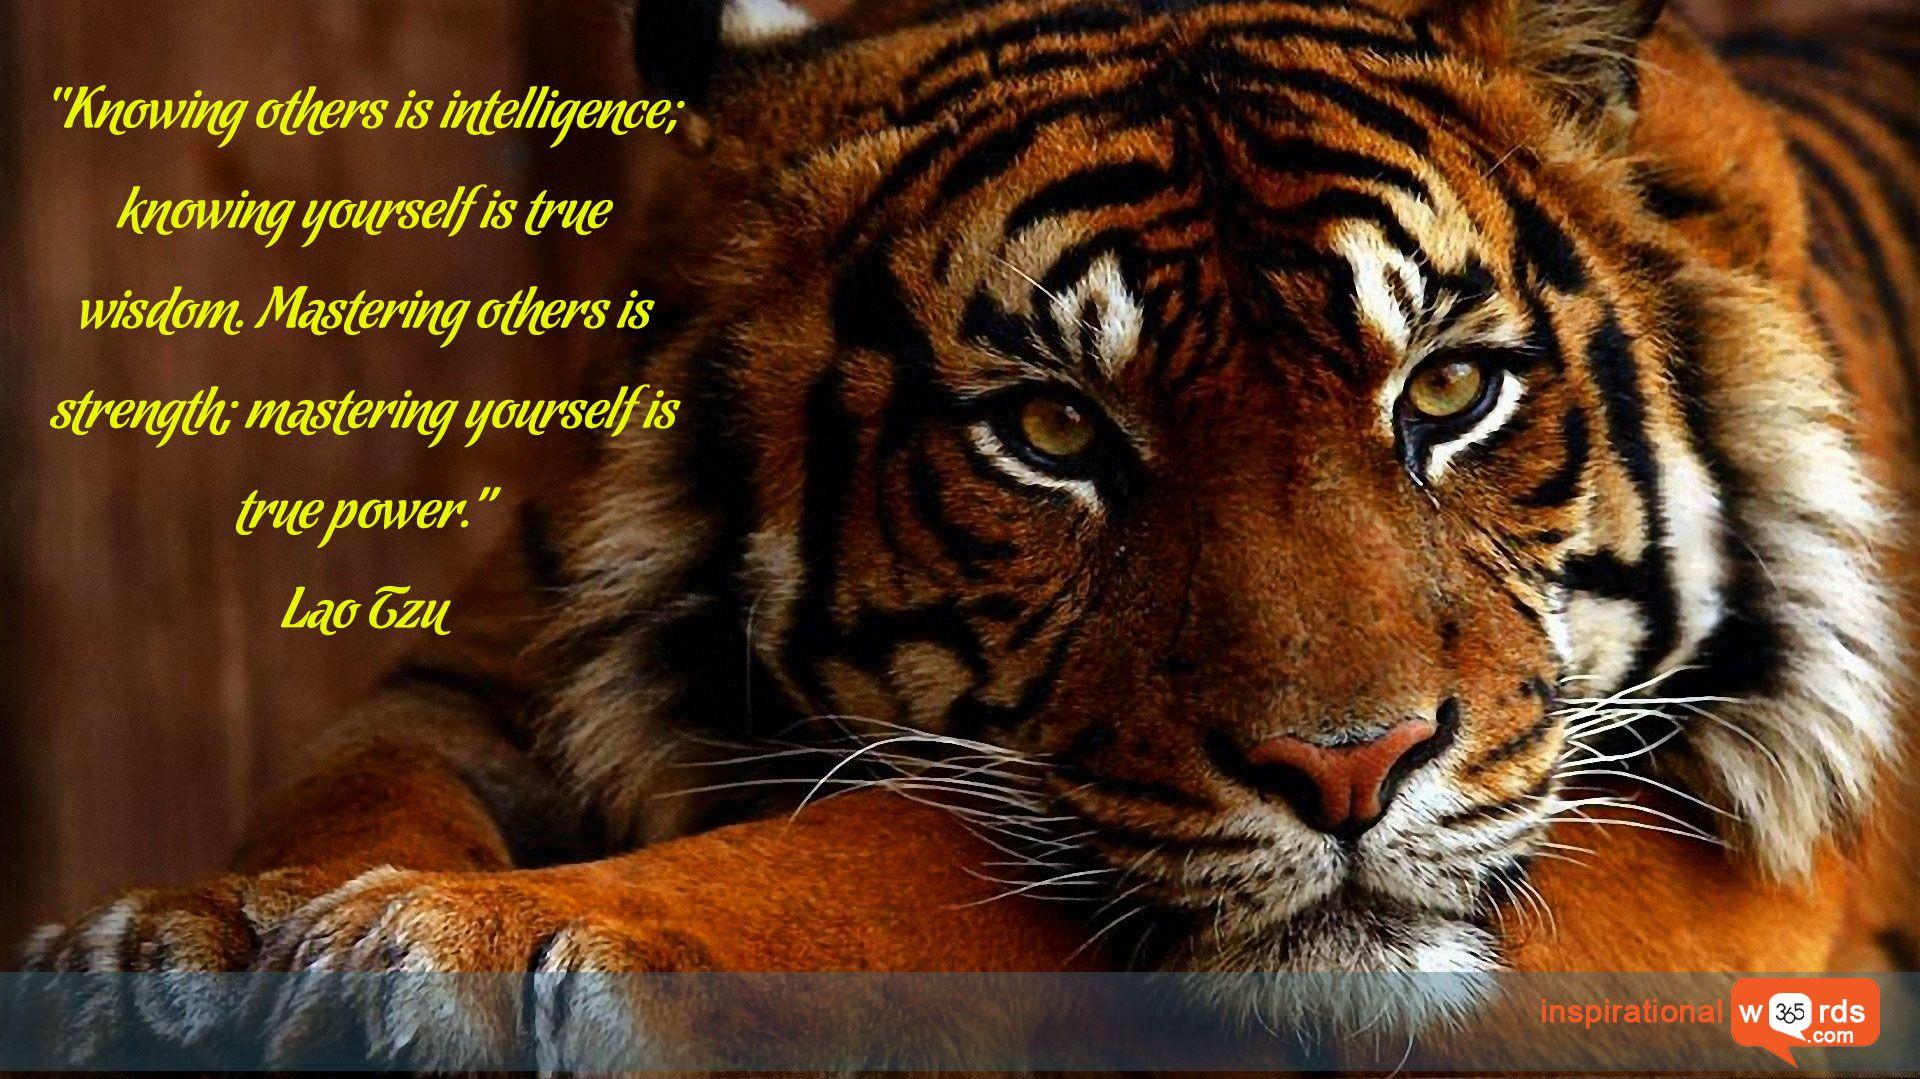 Inspirational Wallpaper Quote by Lao Tzu Pet tiger Animals wild